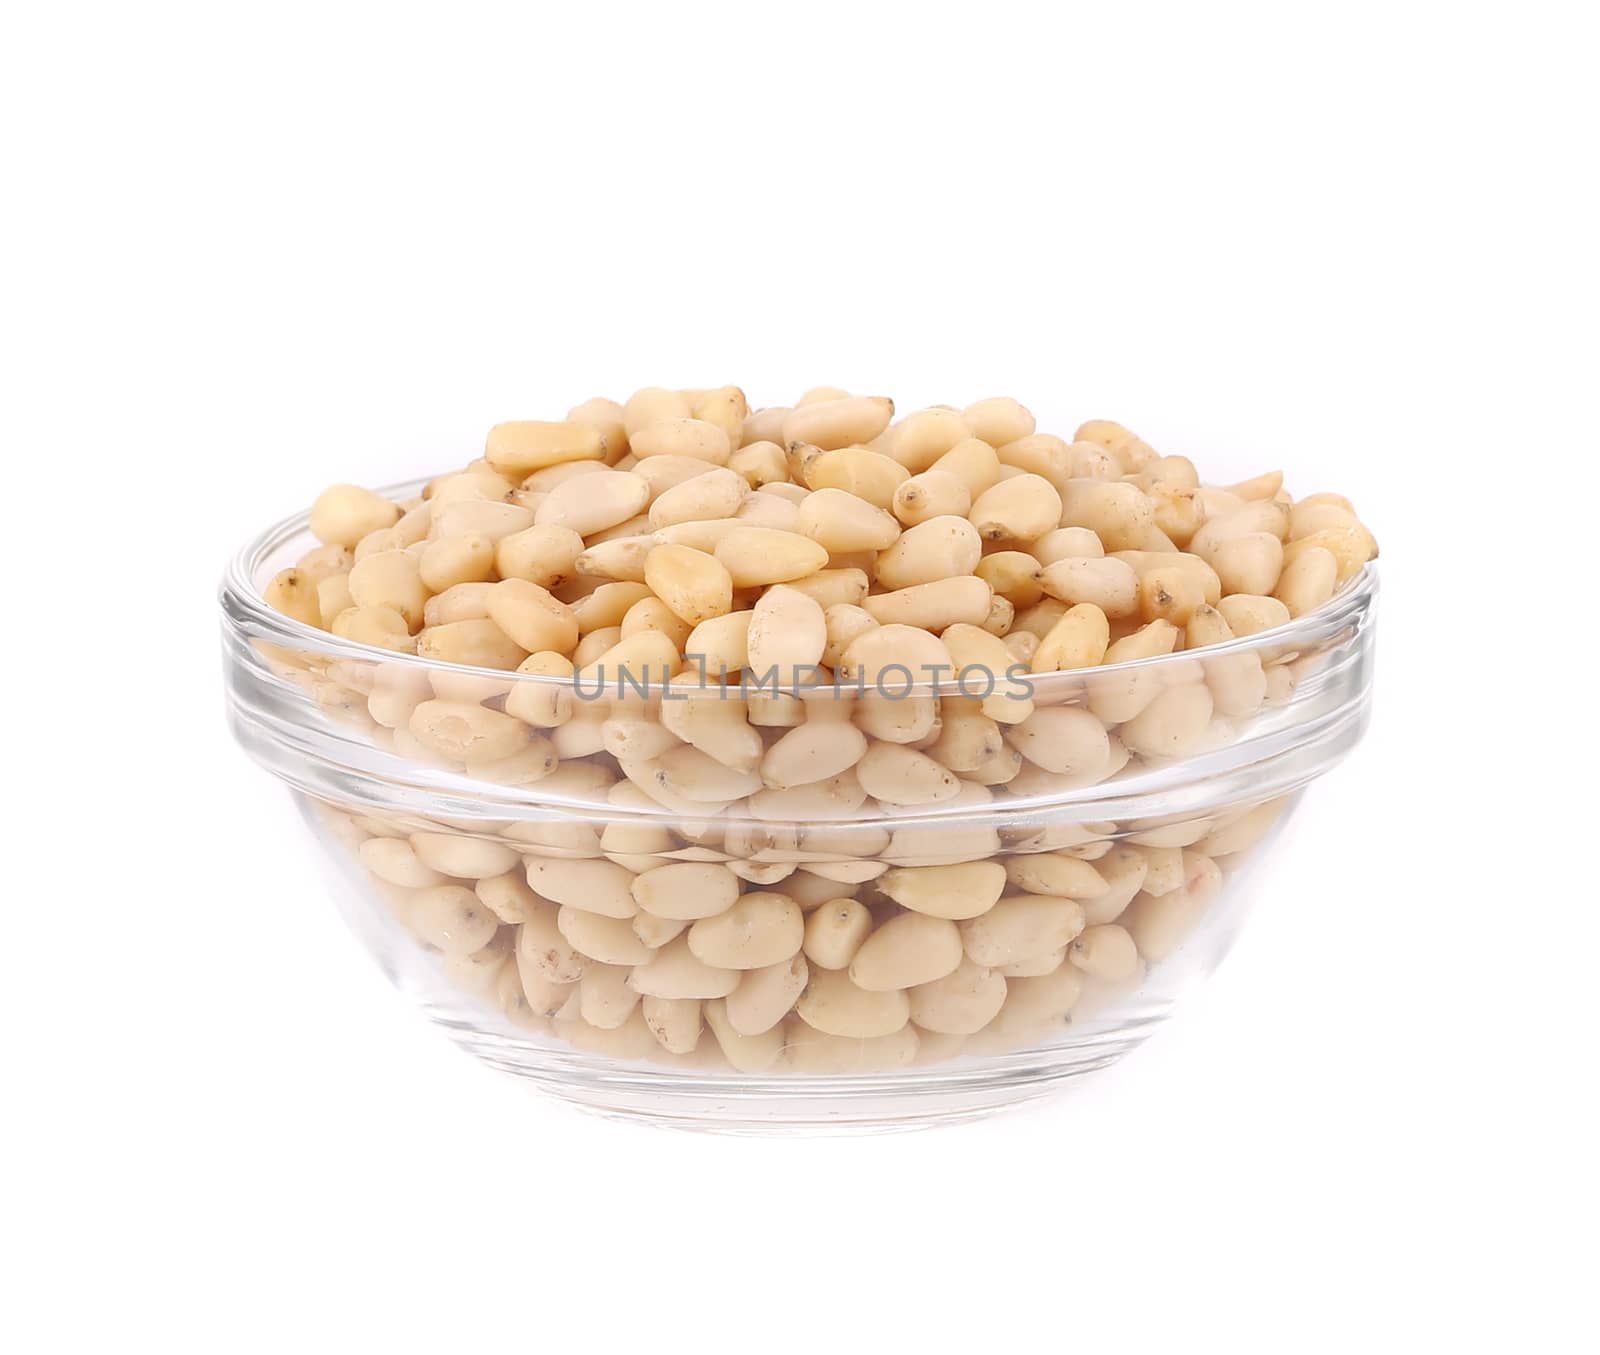 Glass bowl with pine nuts. Isolated on a white background.